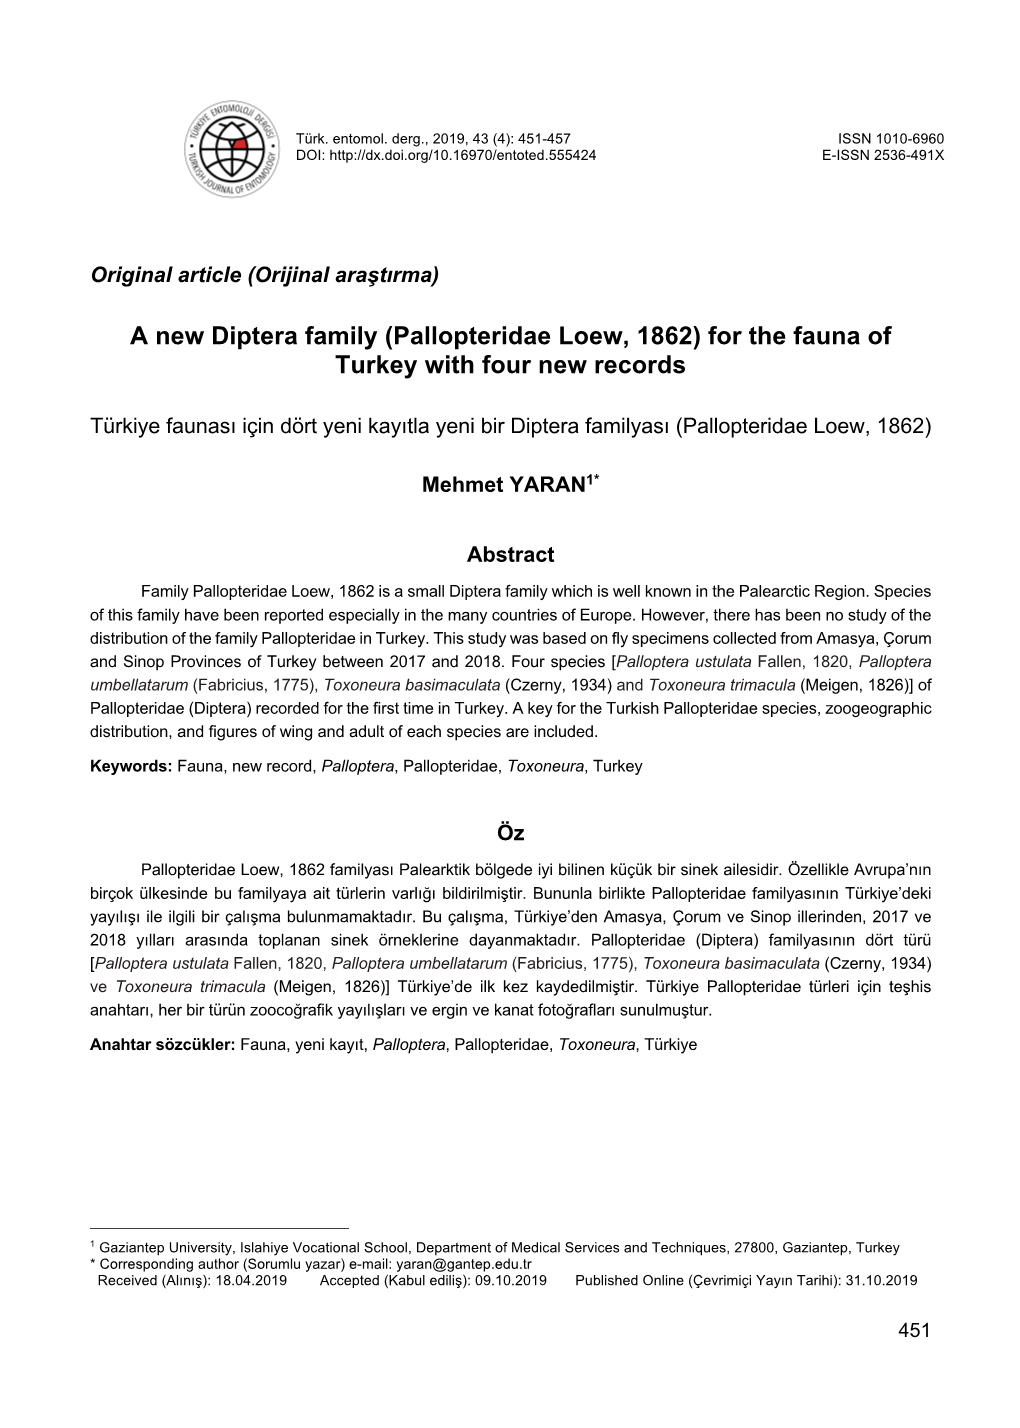 A New Diptera Family (Pallopteridae Loew, 1862) for the Fauna of Turkey with Four New Records